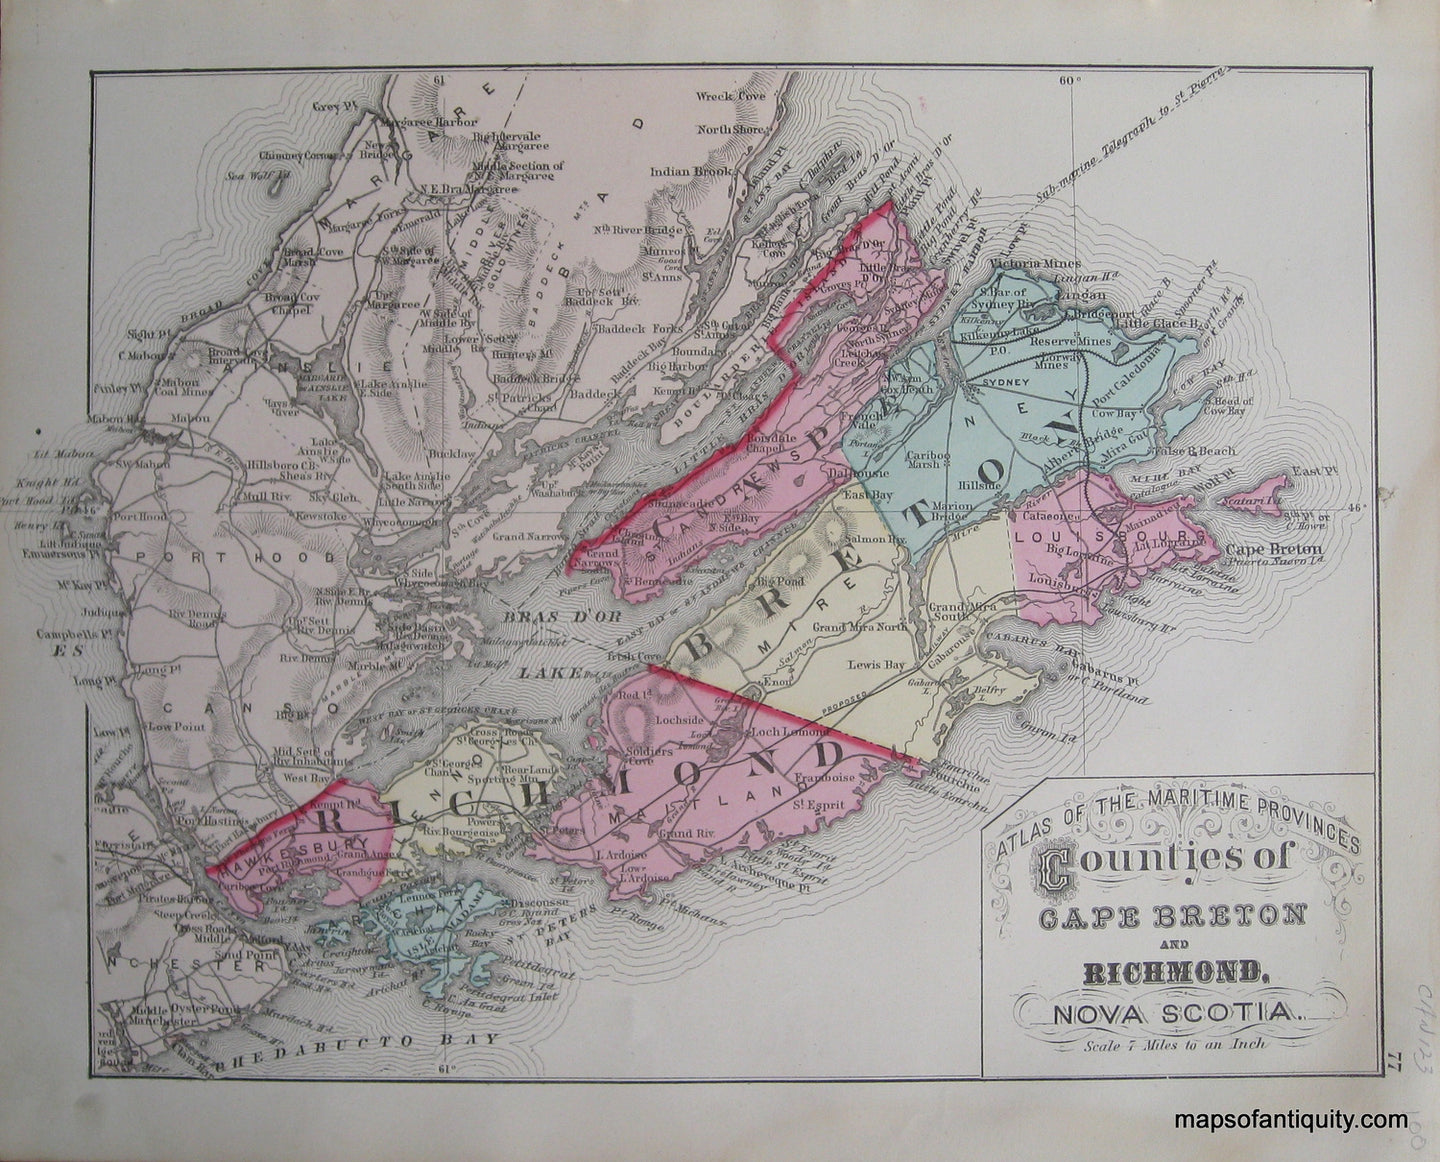 Antique-Hand-Colored-Map-Counties-of-Cape-Breton-and-Richmond-Nova-Scotia-North-America-Canada-1879-Roe-Maps-Of-Antiquity